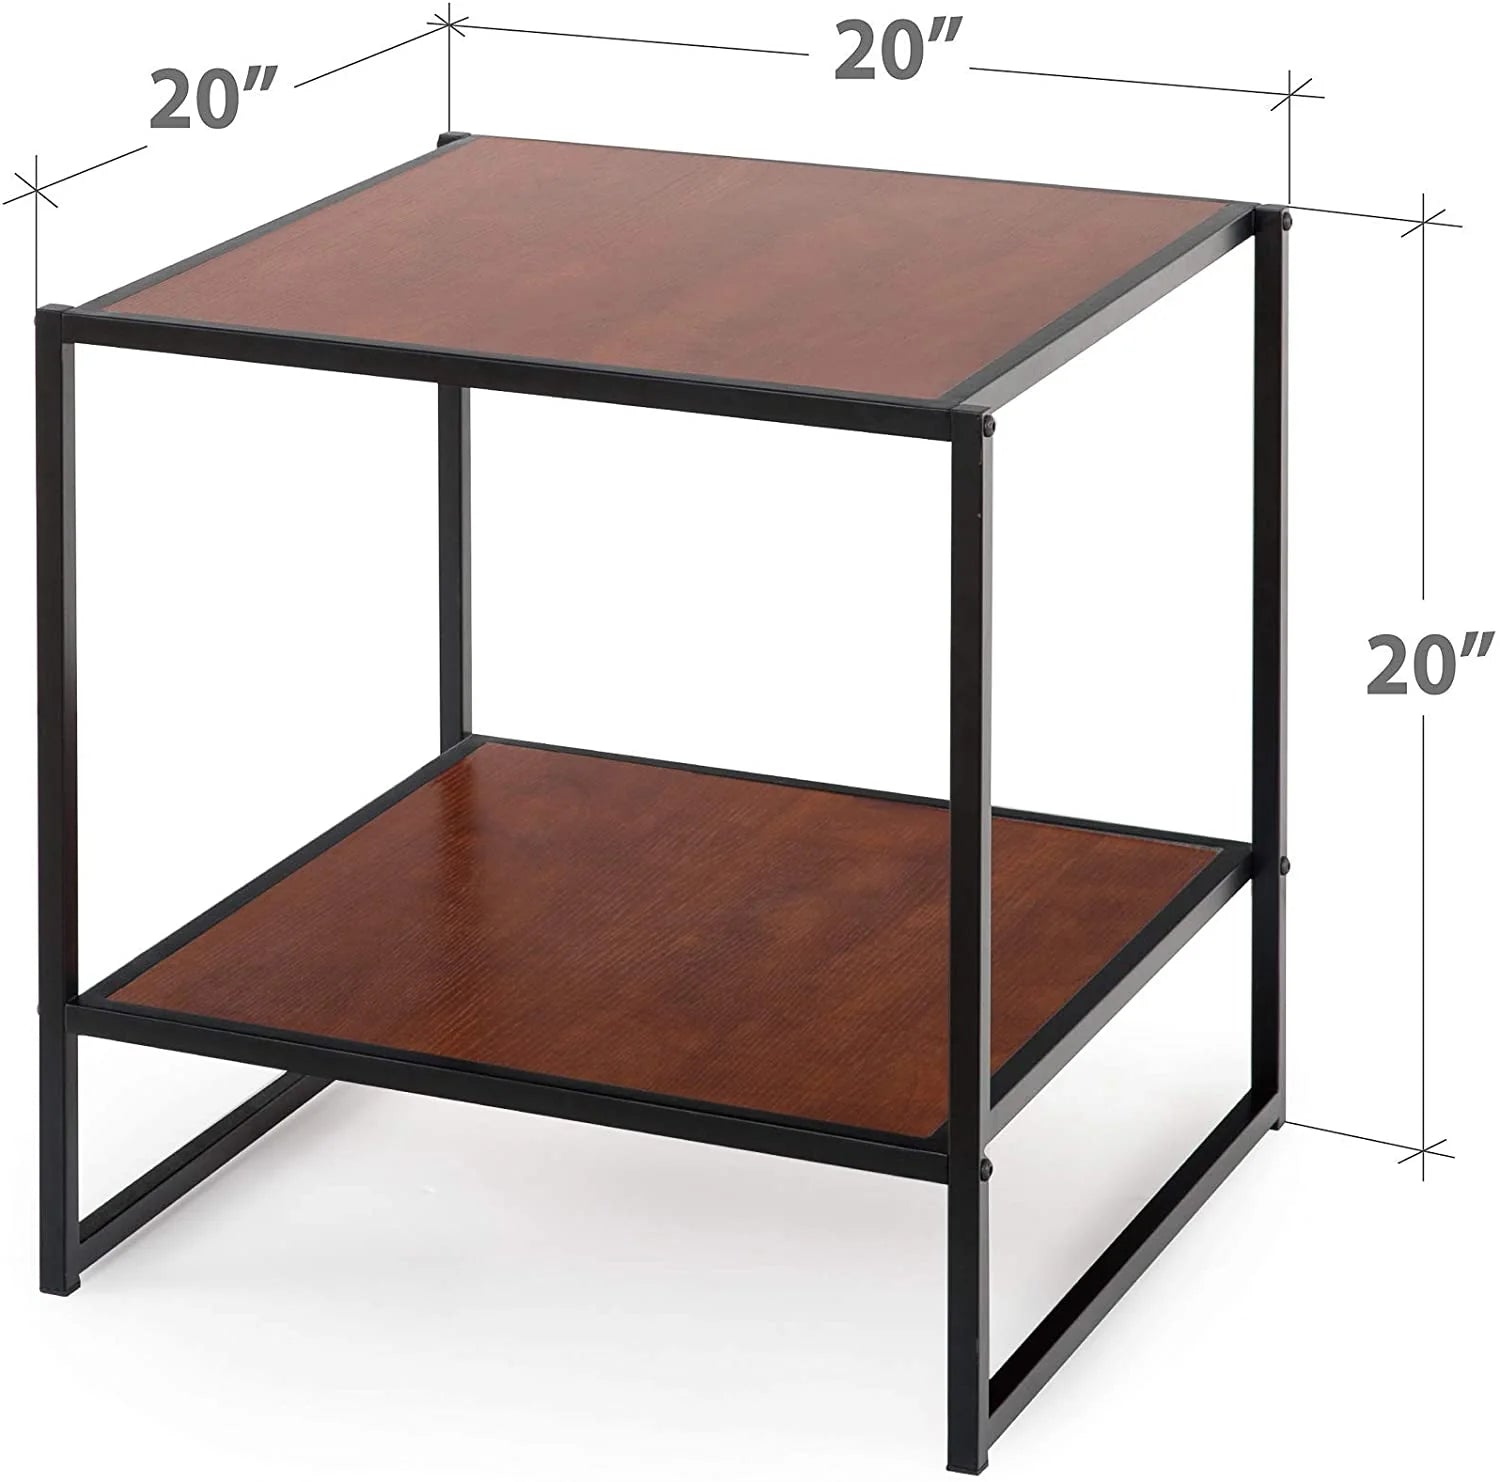 Side Tables: Black Frame Bedside Table / End Table / Easy Assembly, Red mahogany wood grain